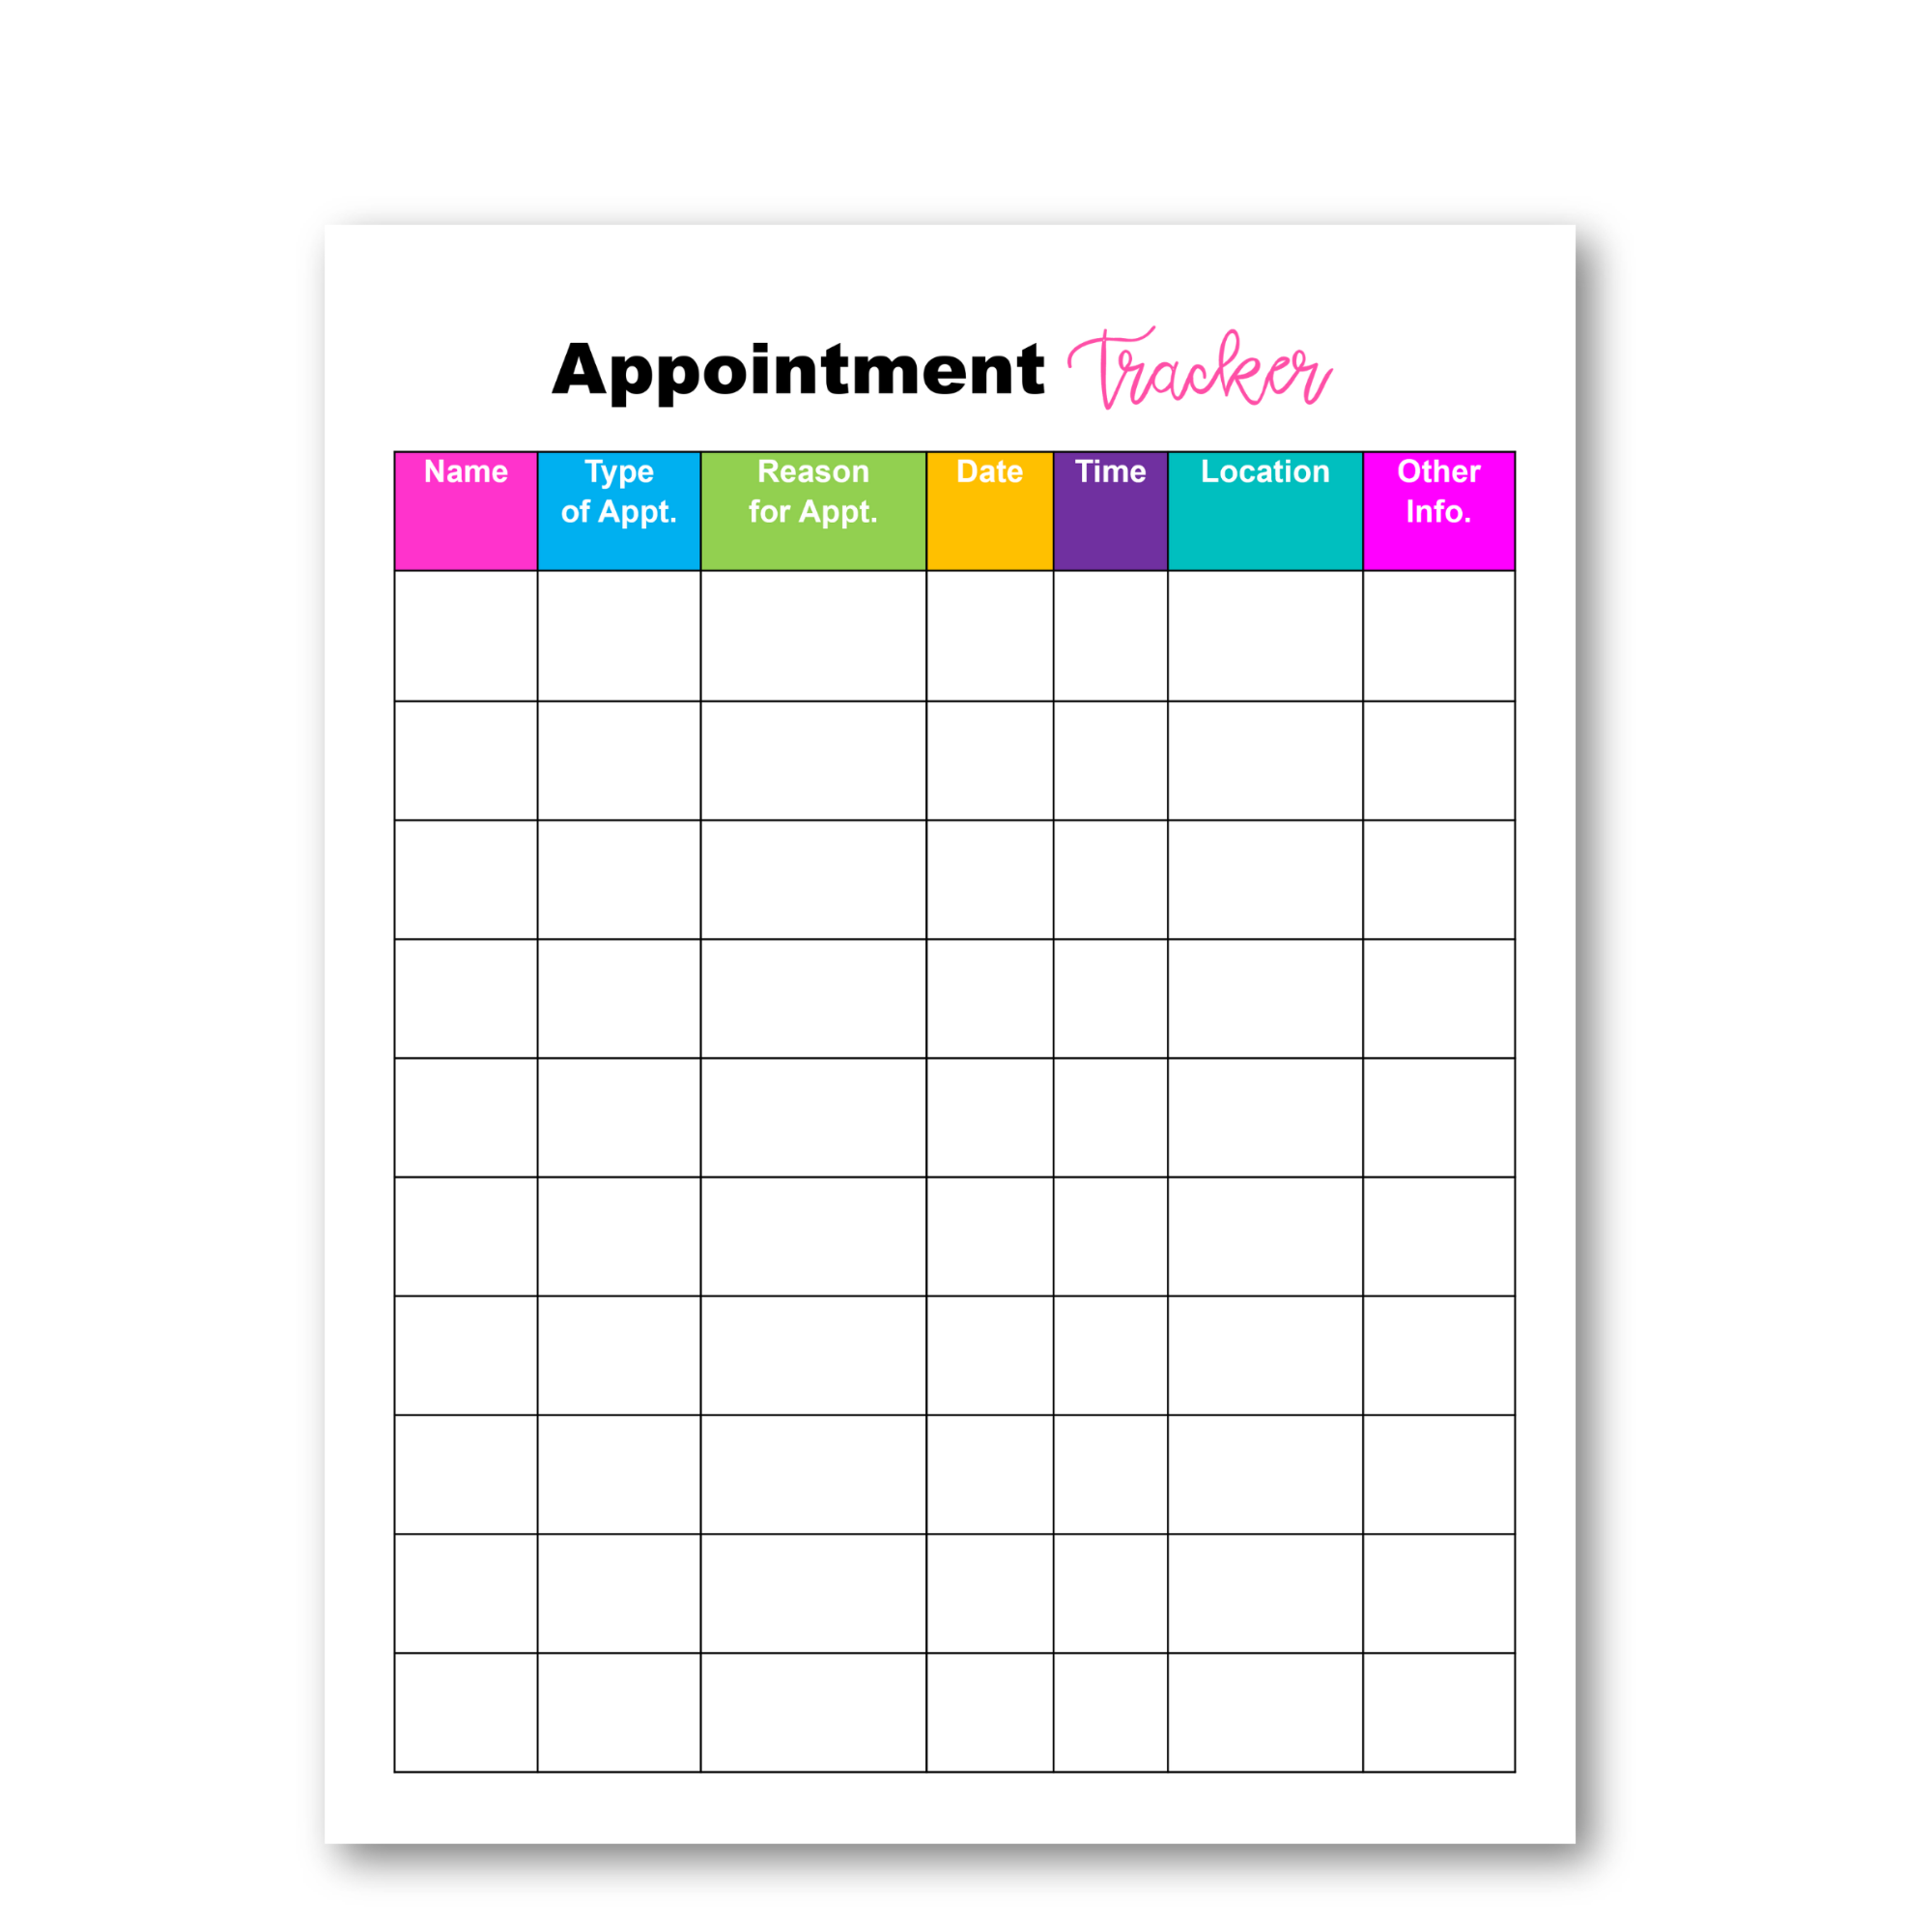 appointment-tracker-scrapbooking-craft-supplies-tools-embellishments